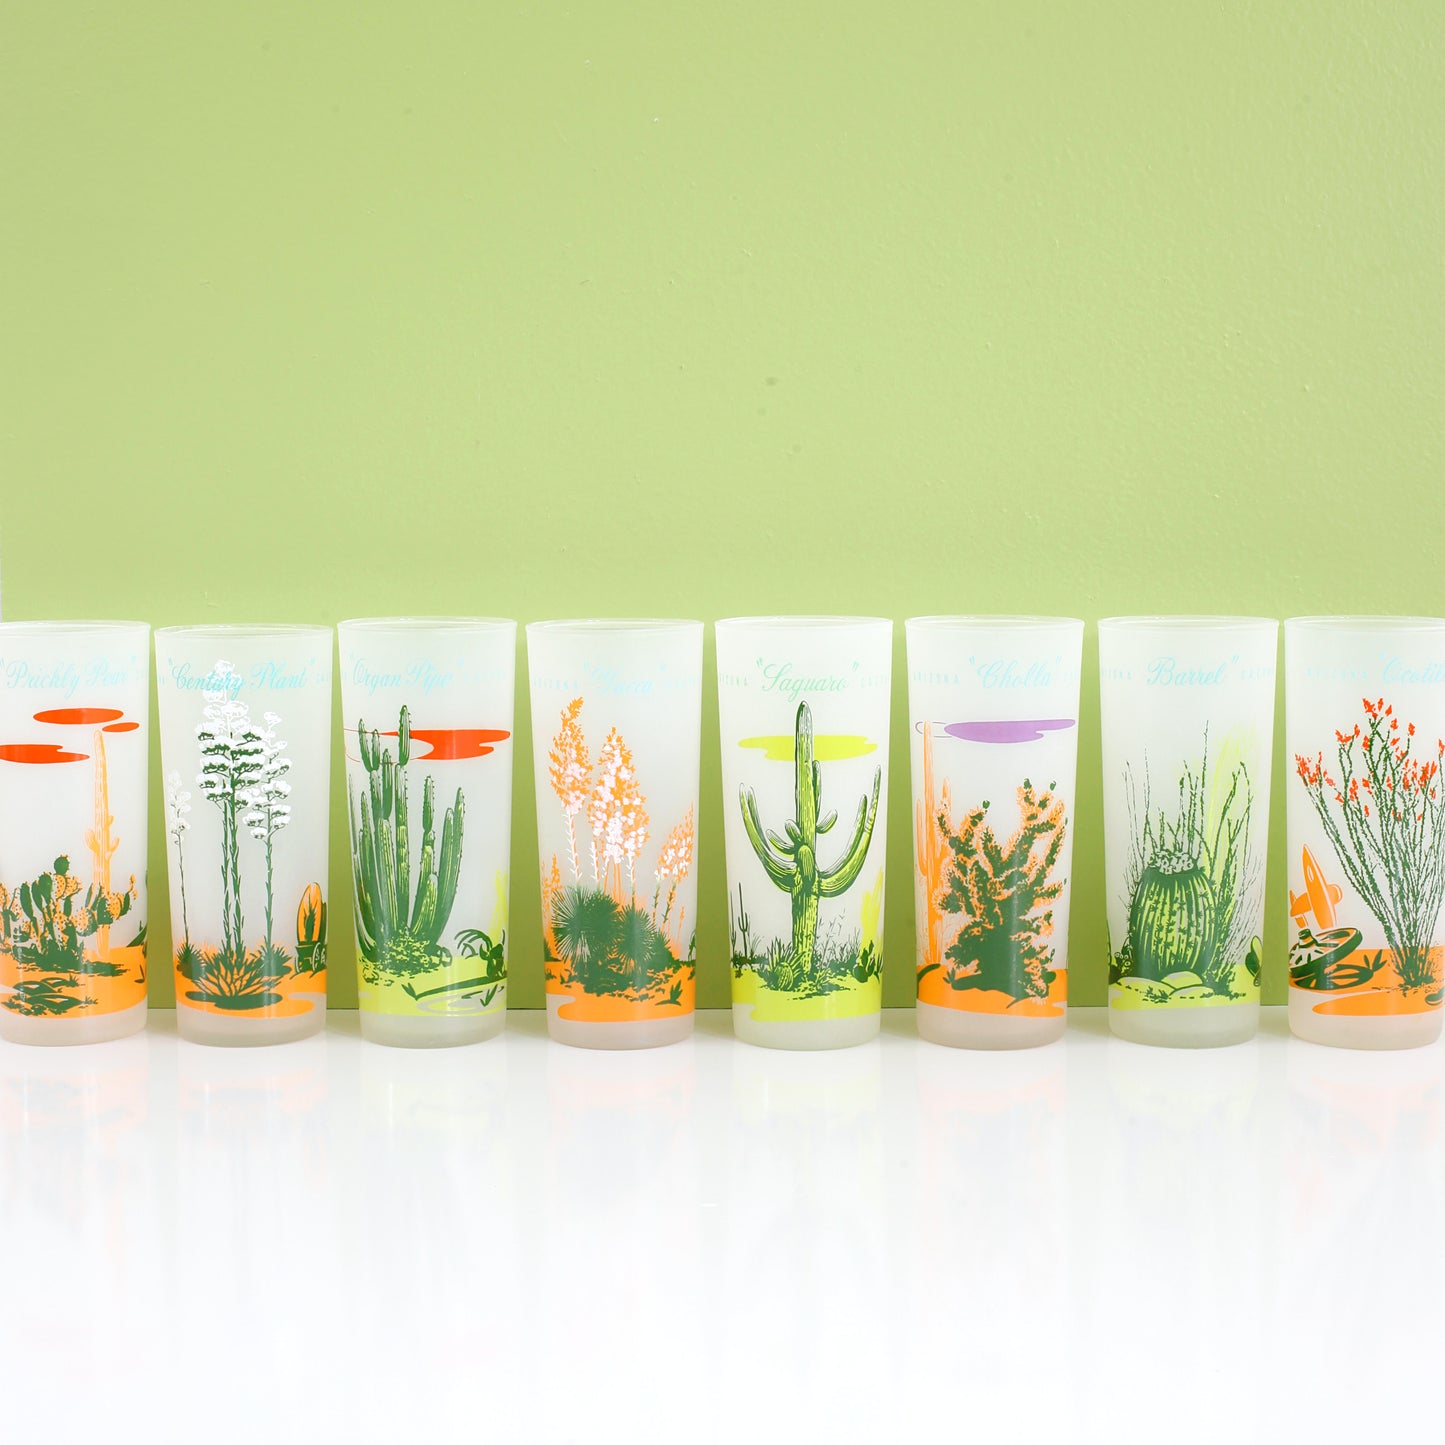 SOLD - Vintage Blakely Frosted Cactus Glasses